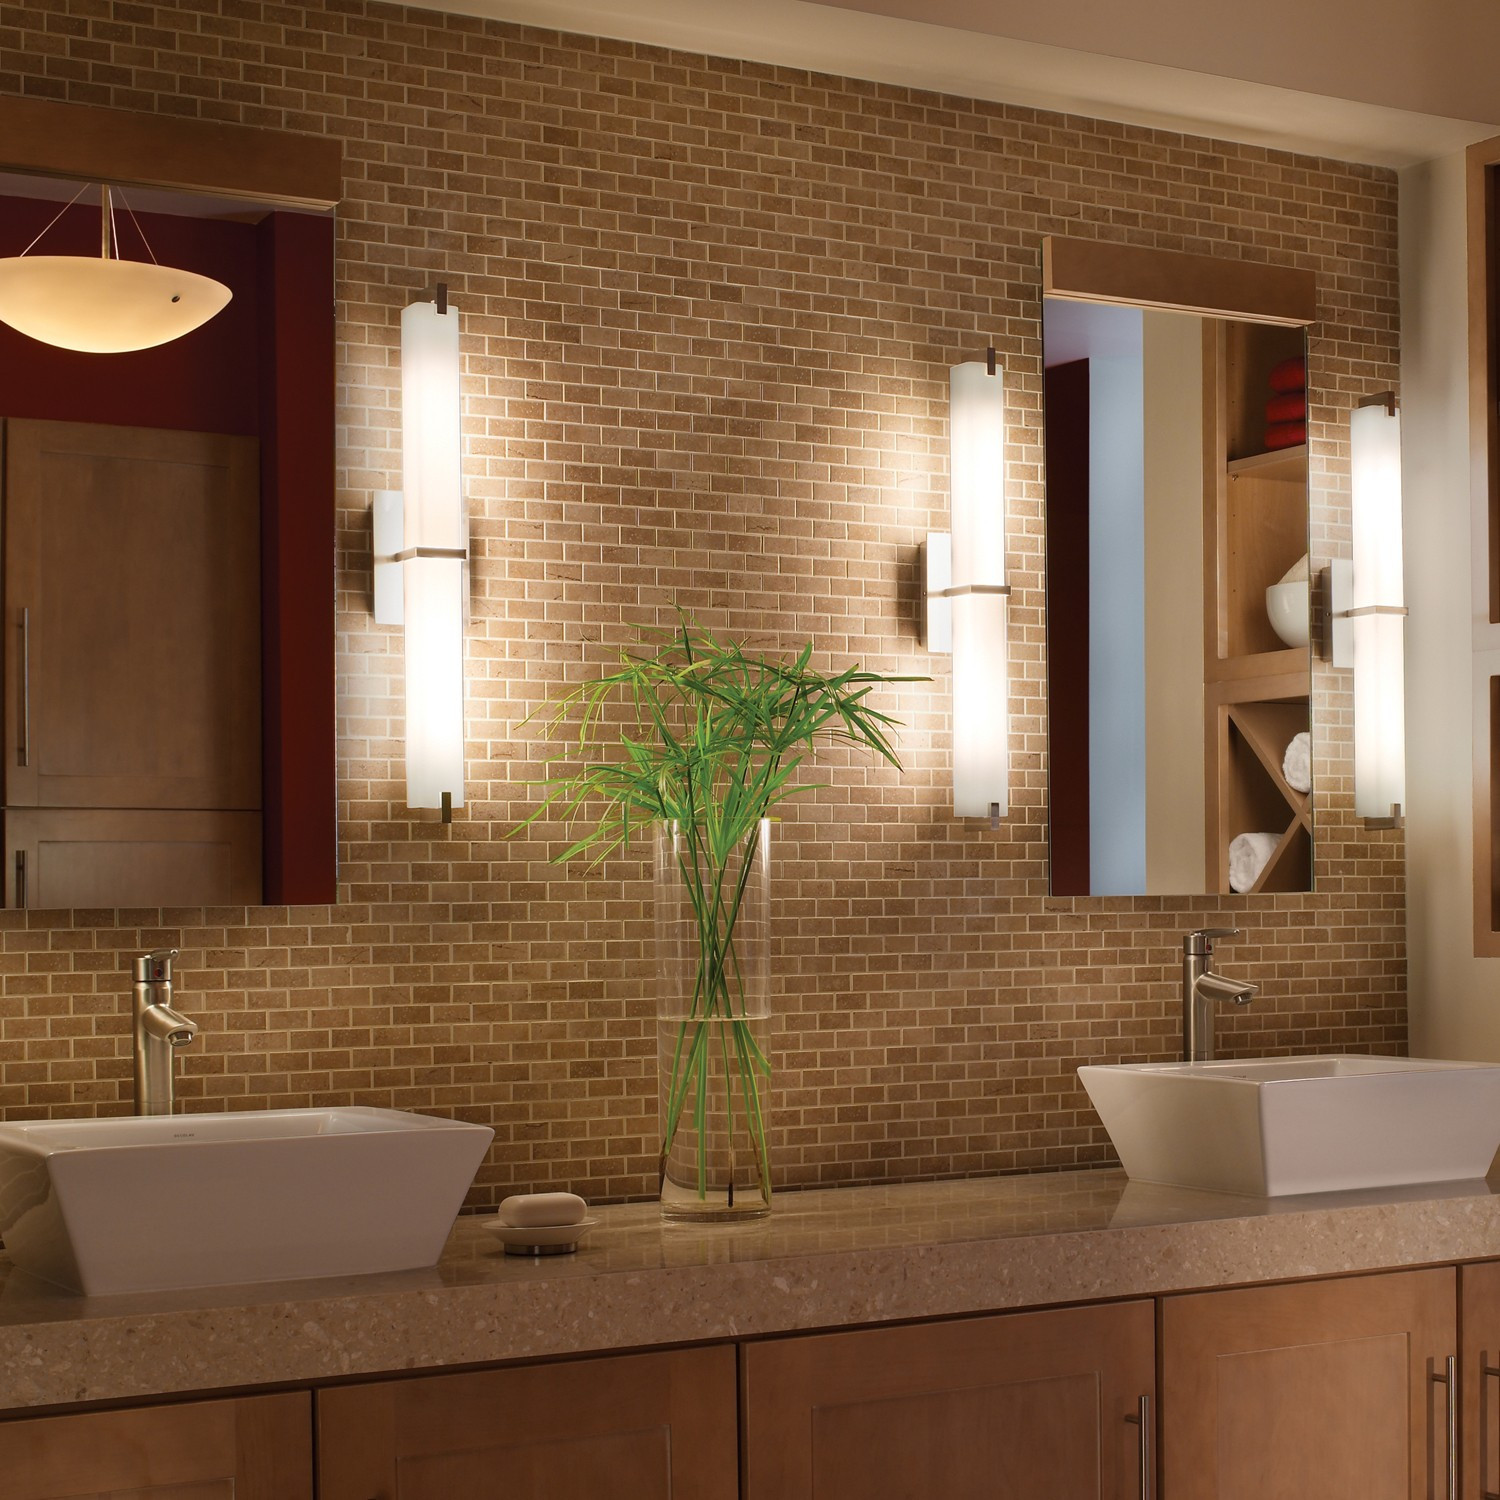 25 Insanely Recessed Lighting Over Bathroom Vanity Home